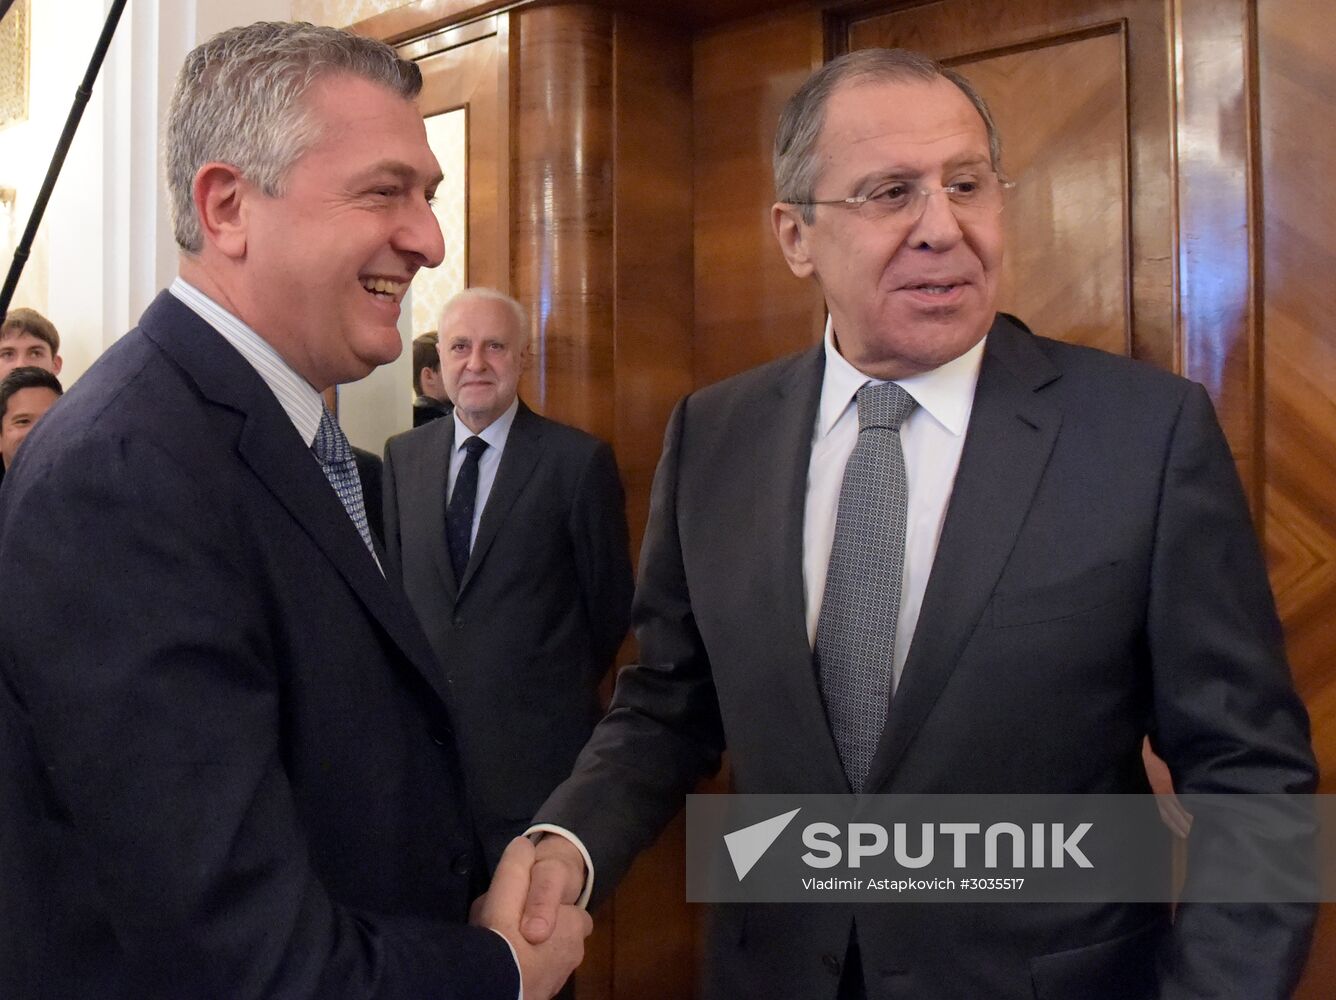 Russian Foreign Minister Sergei Lavrov's meeting with UN High Commissioner for Refugees Filippo Grandi